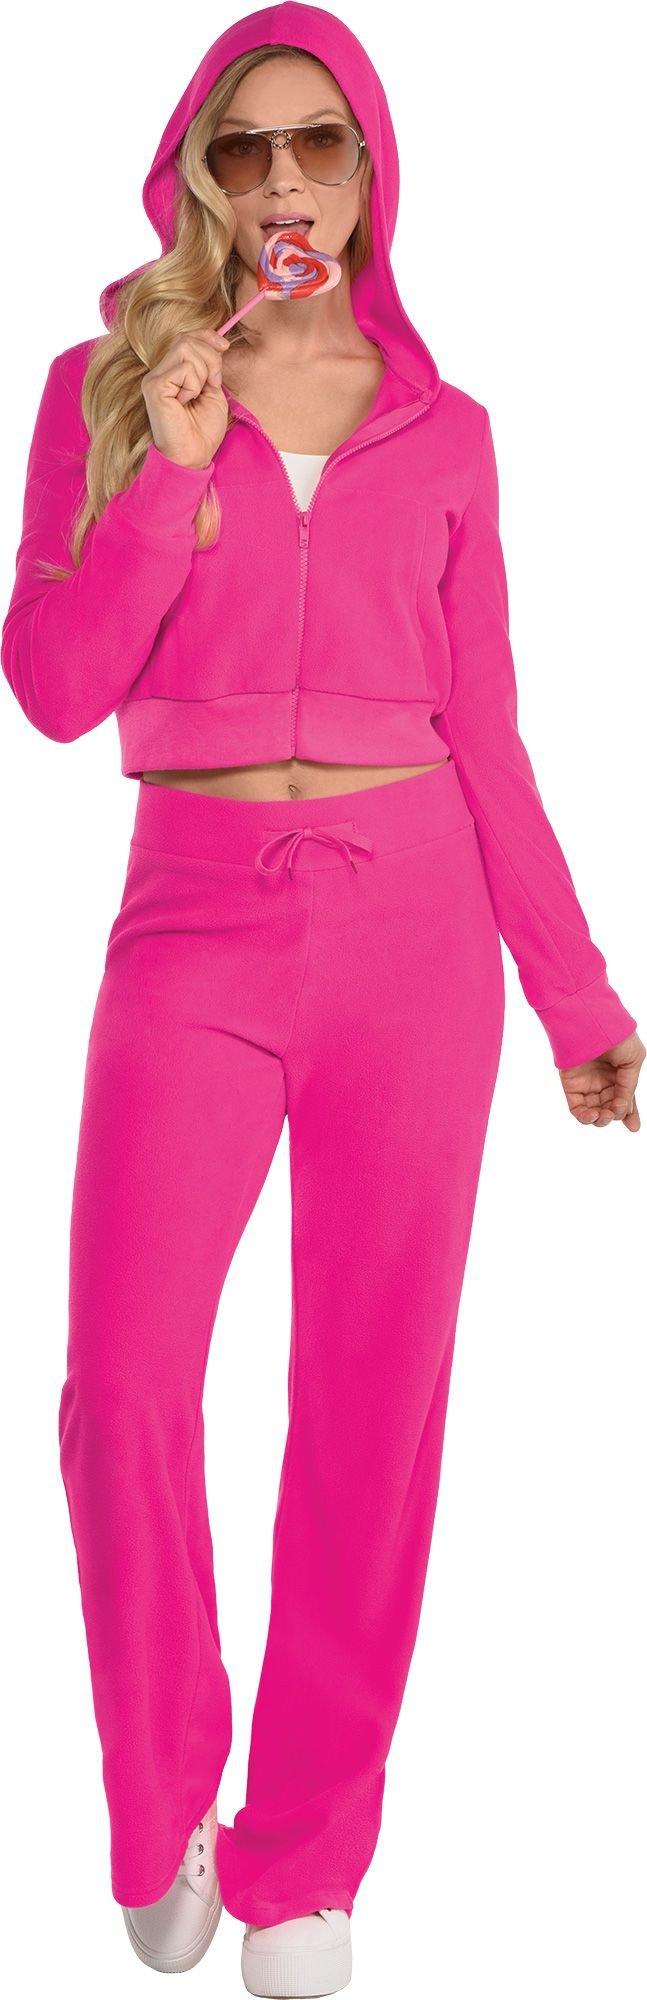 Adult Pink Couture Cutie Costume | Party City